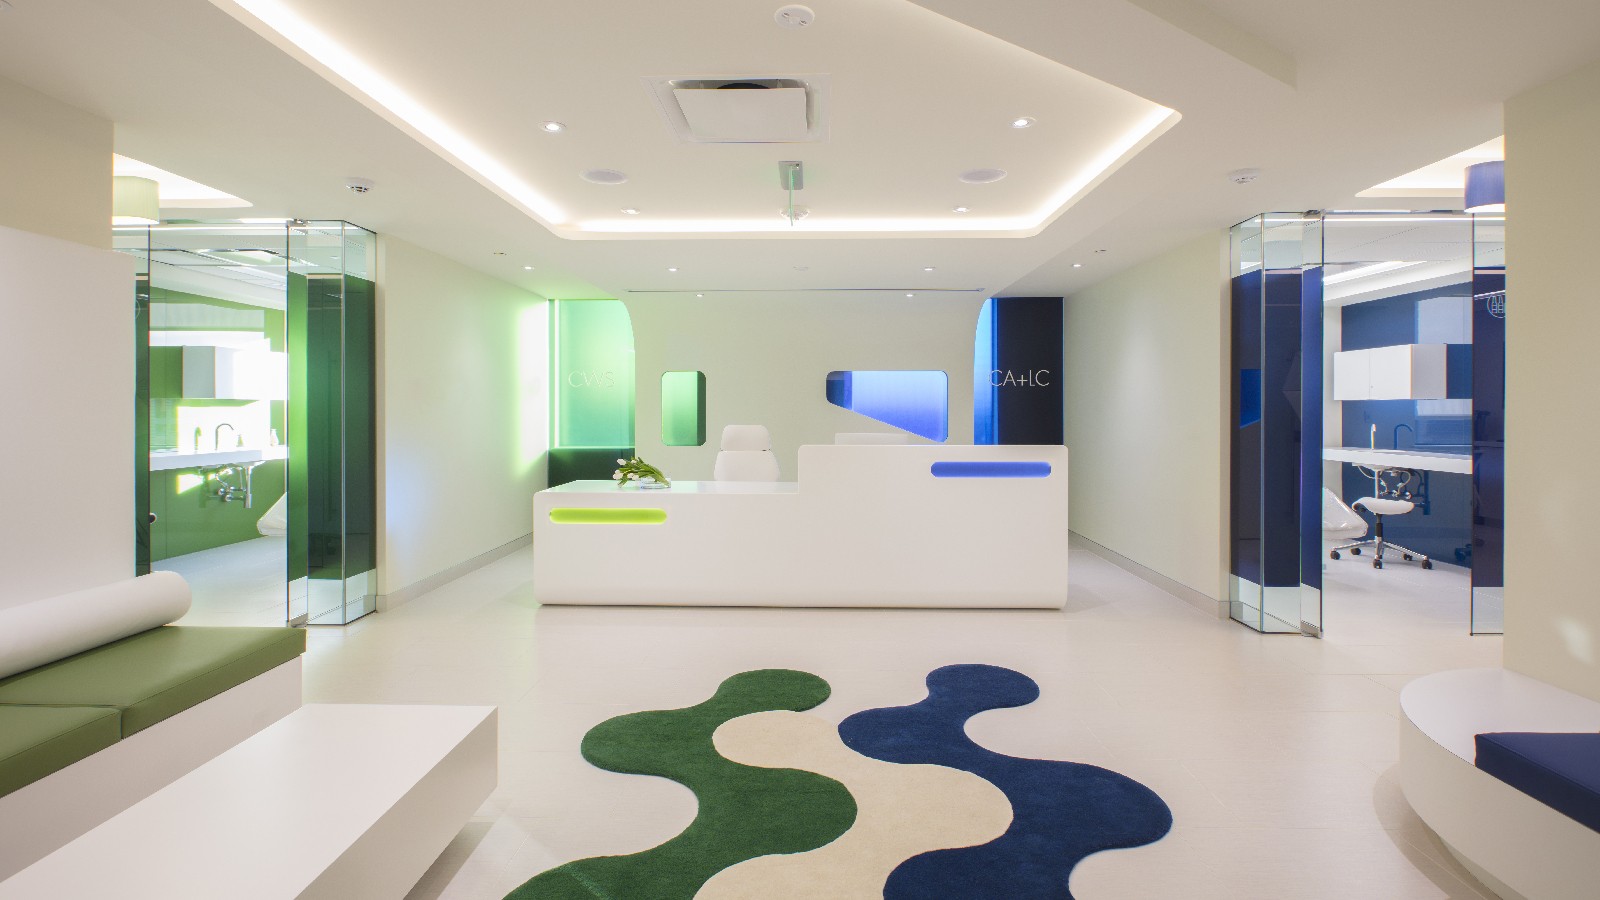 PORCELANOSA Grupo Projects: The presence of KRION™ redesigns the rooms in the Capital Aesthetic + Laser Center in Washington